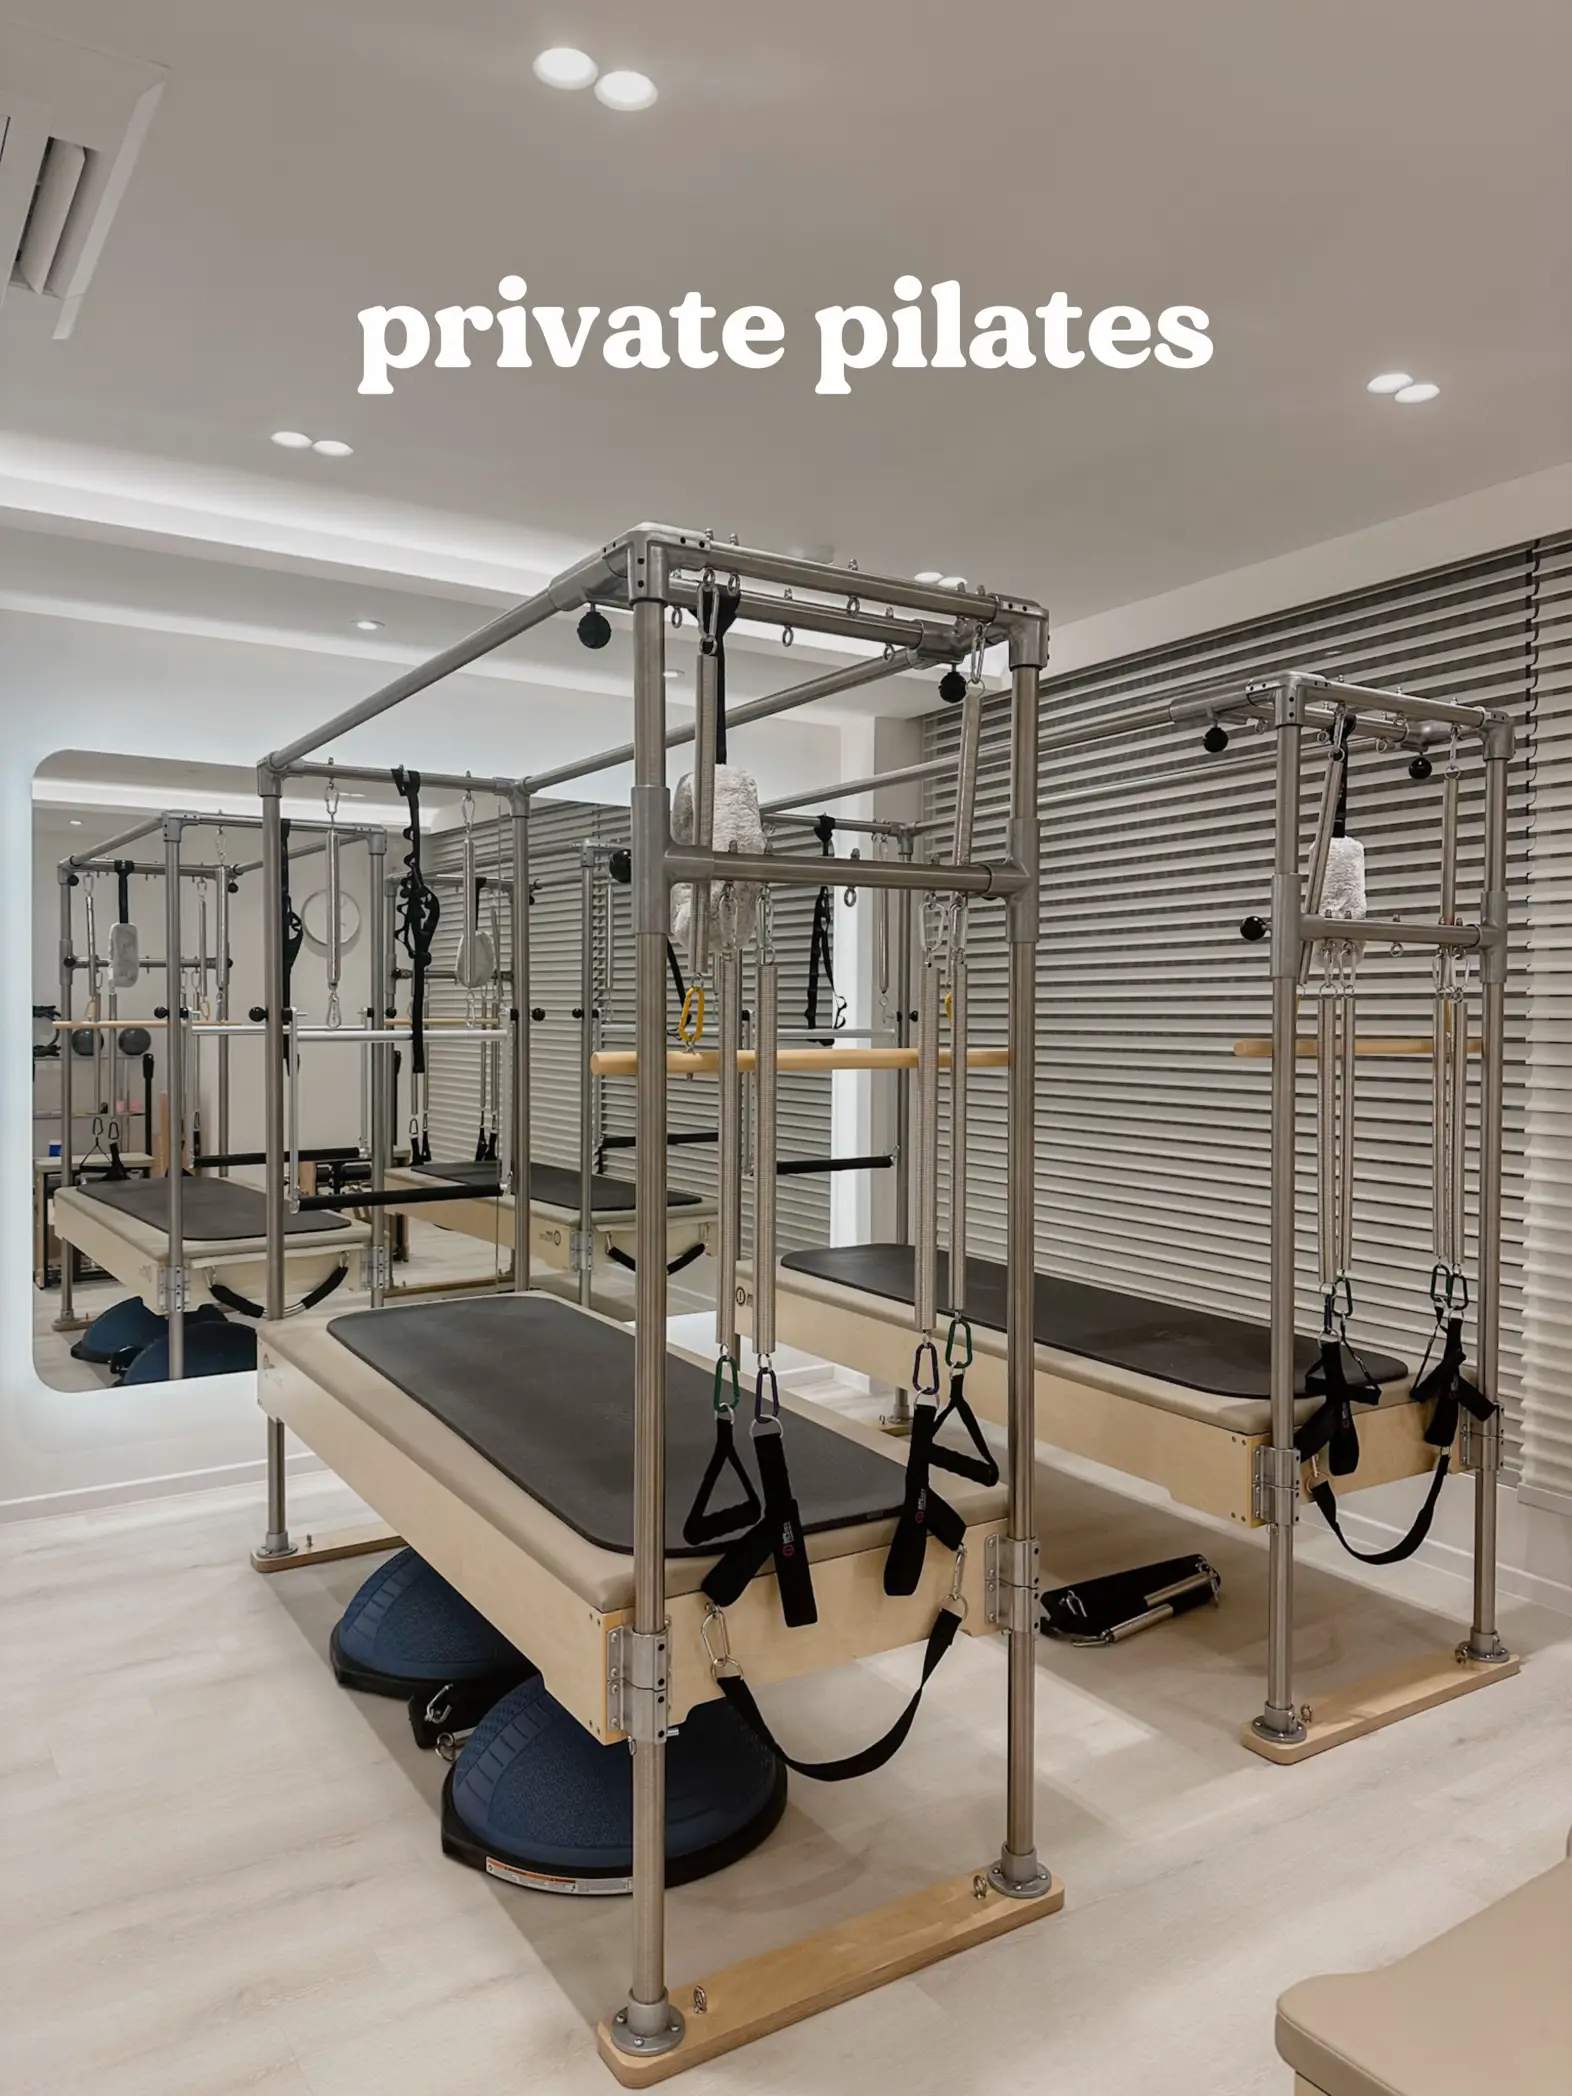 ALL-WHITE AESTHETIC pilates studio in town!! 🤍, Gallery posted by jiaxian